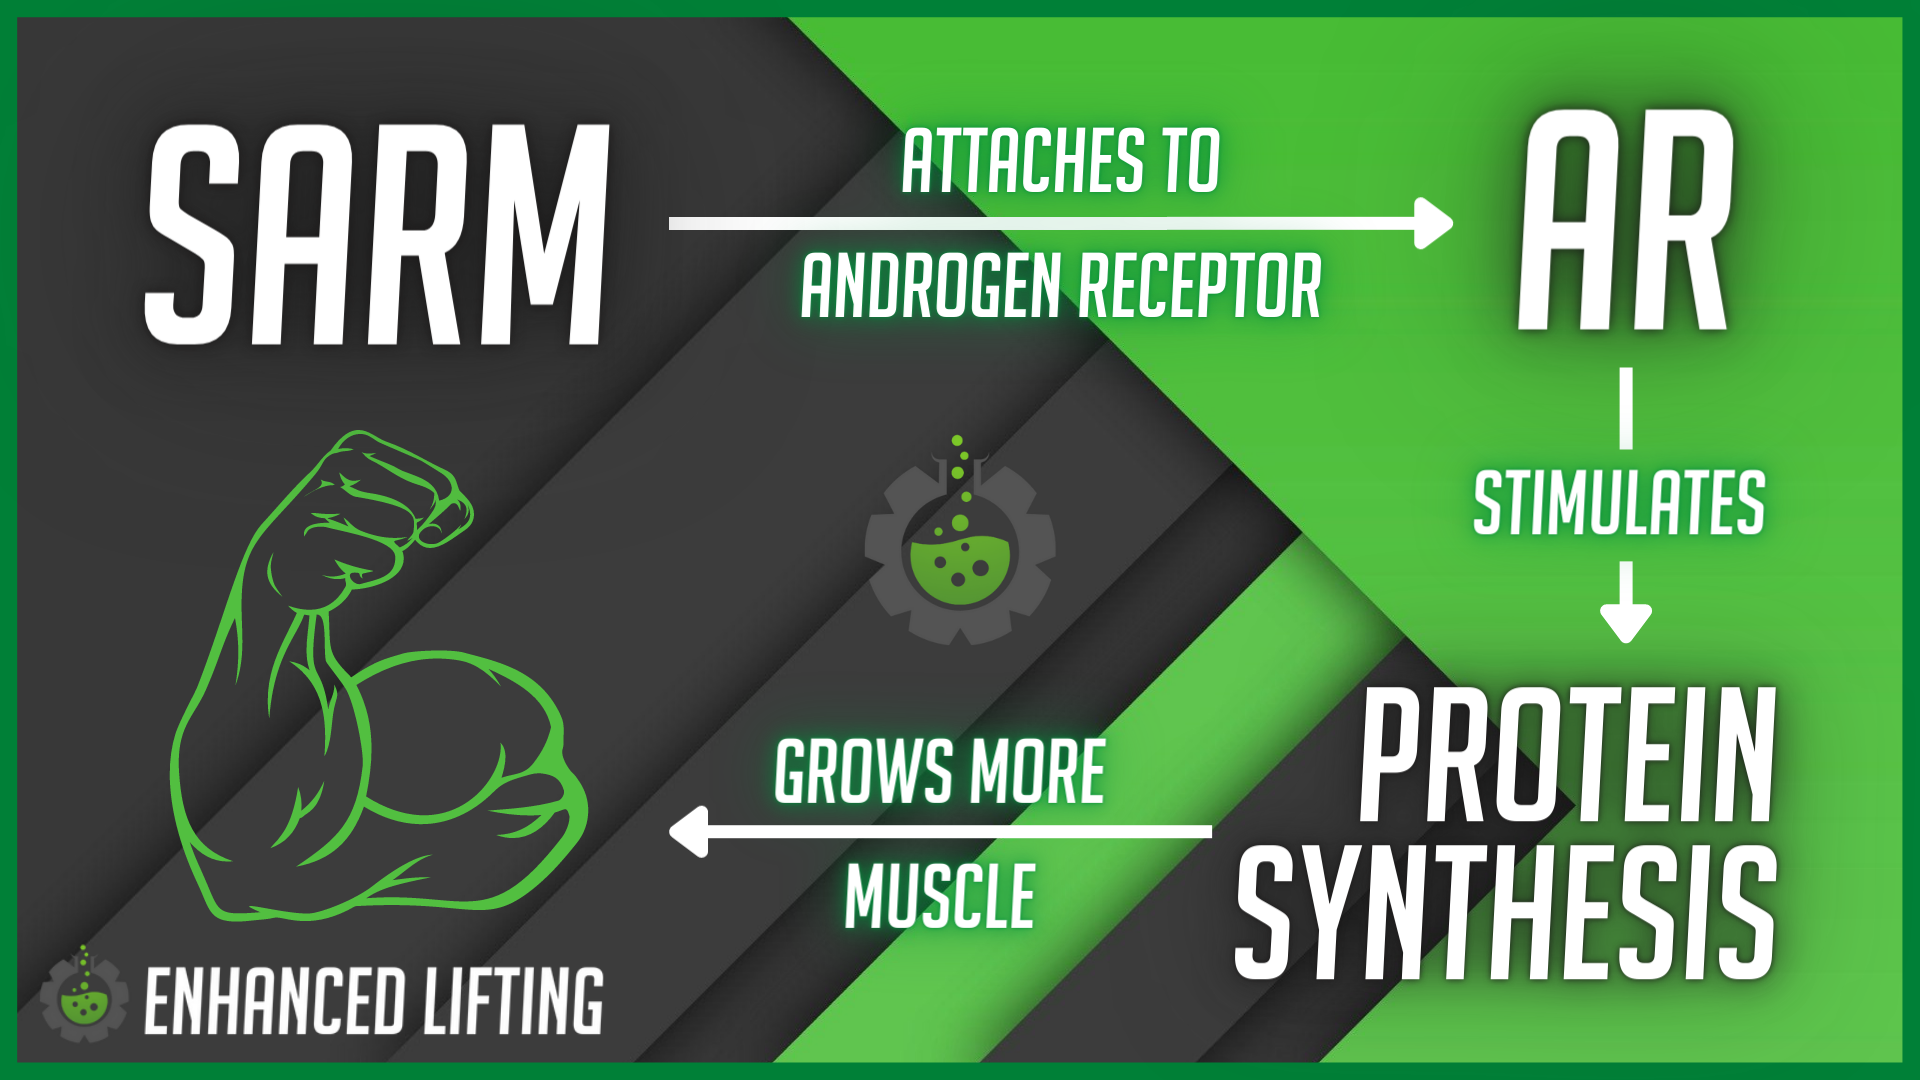 MECHANISM OF ACTION OF SARMS